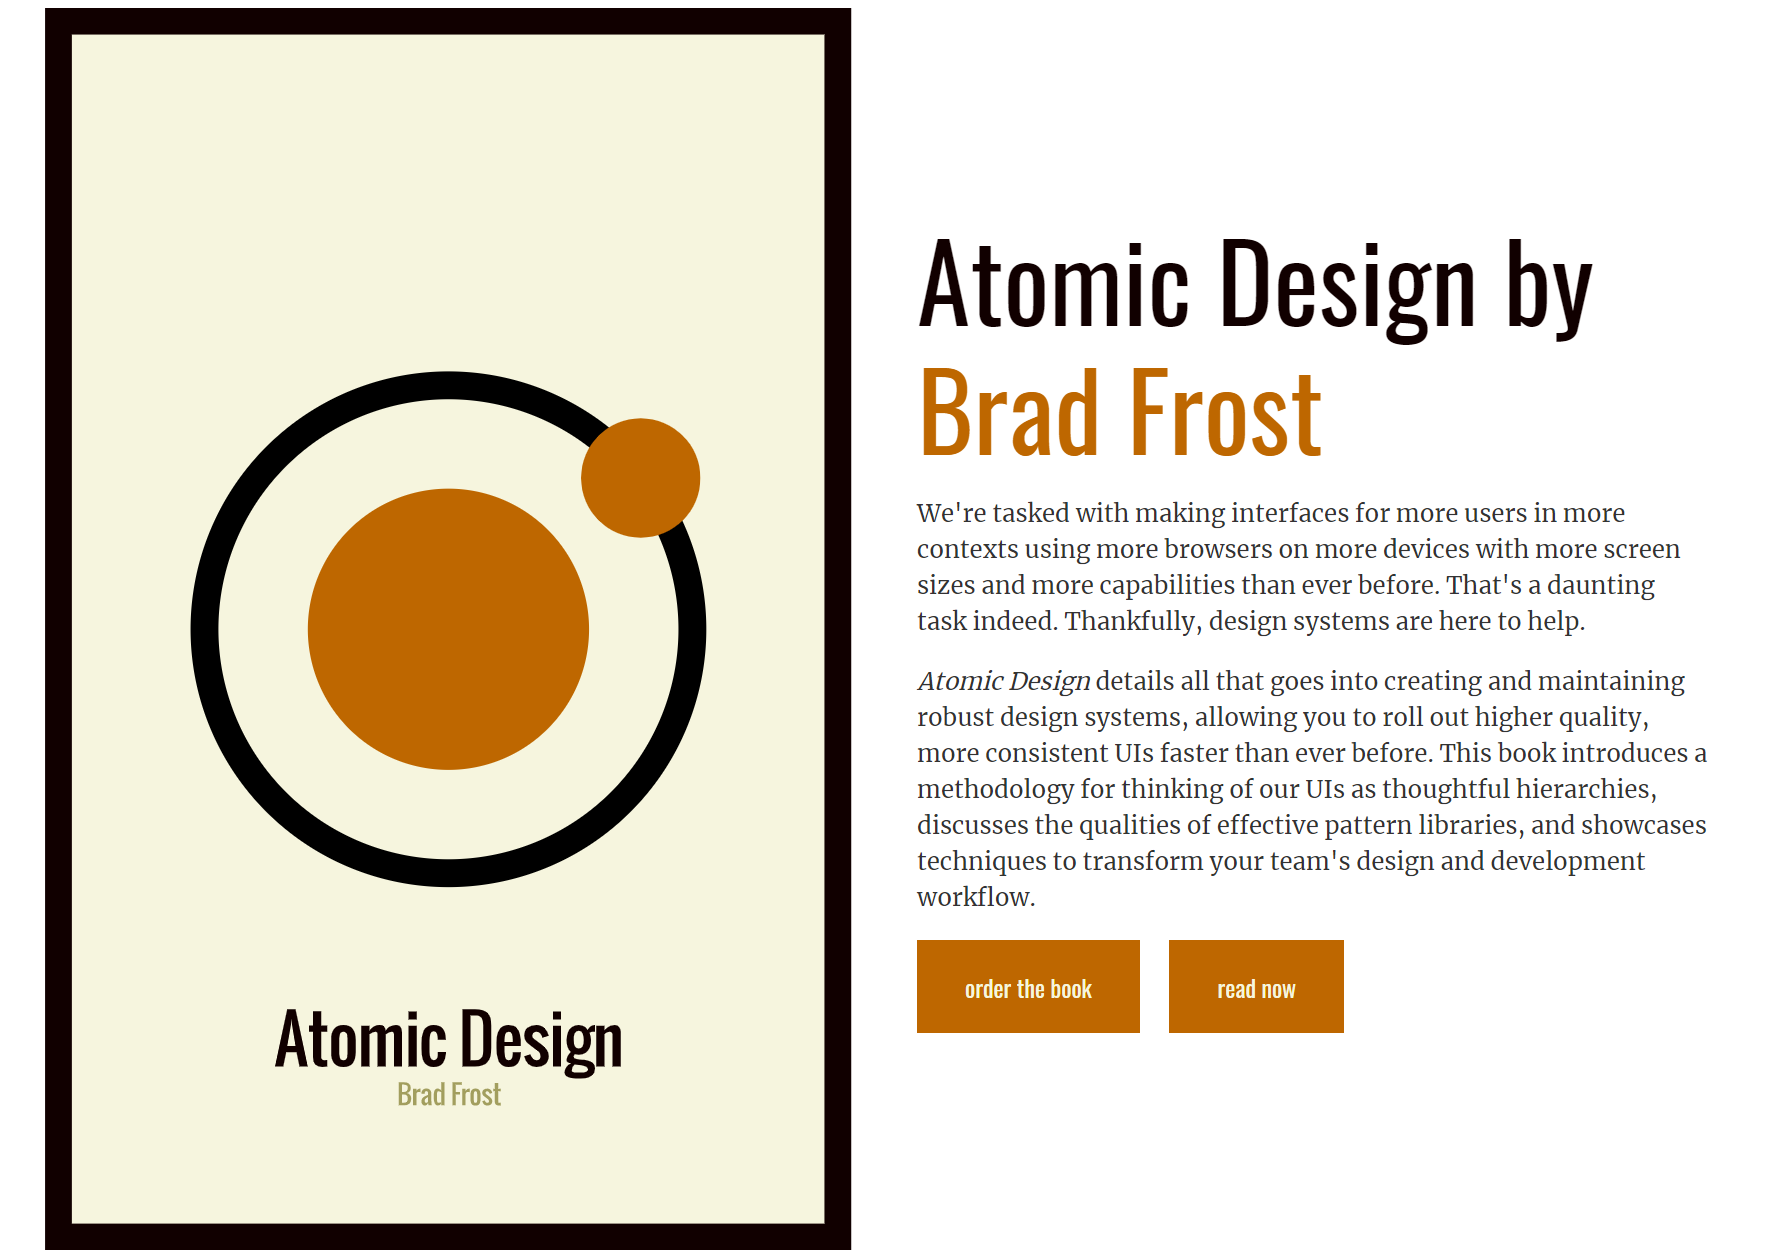 Atomic Design by Brad Frost